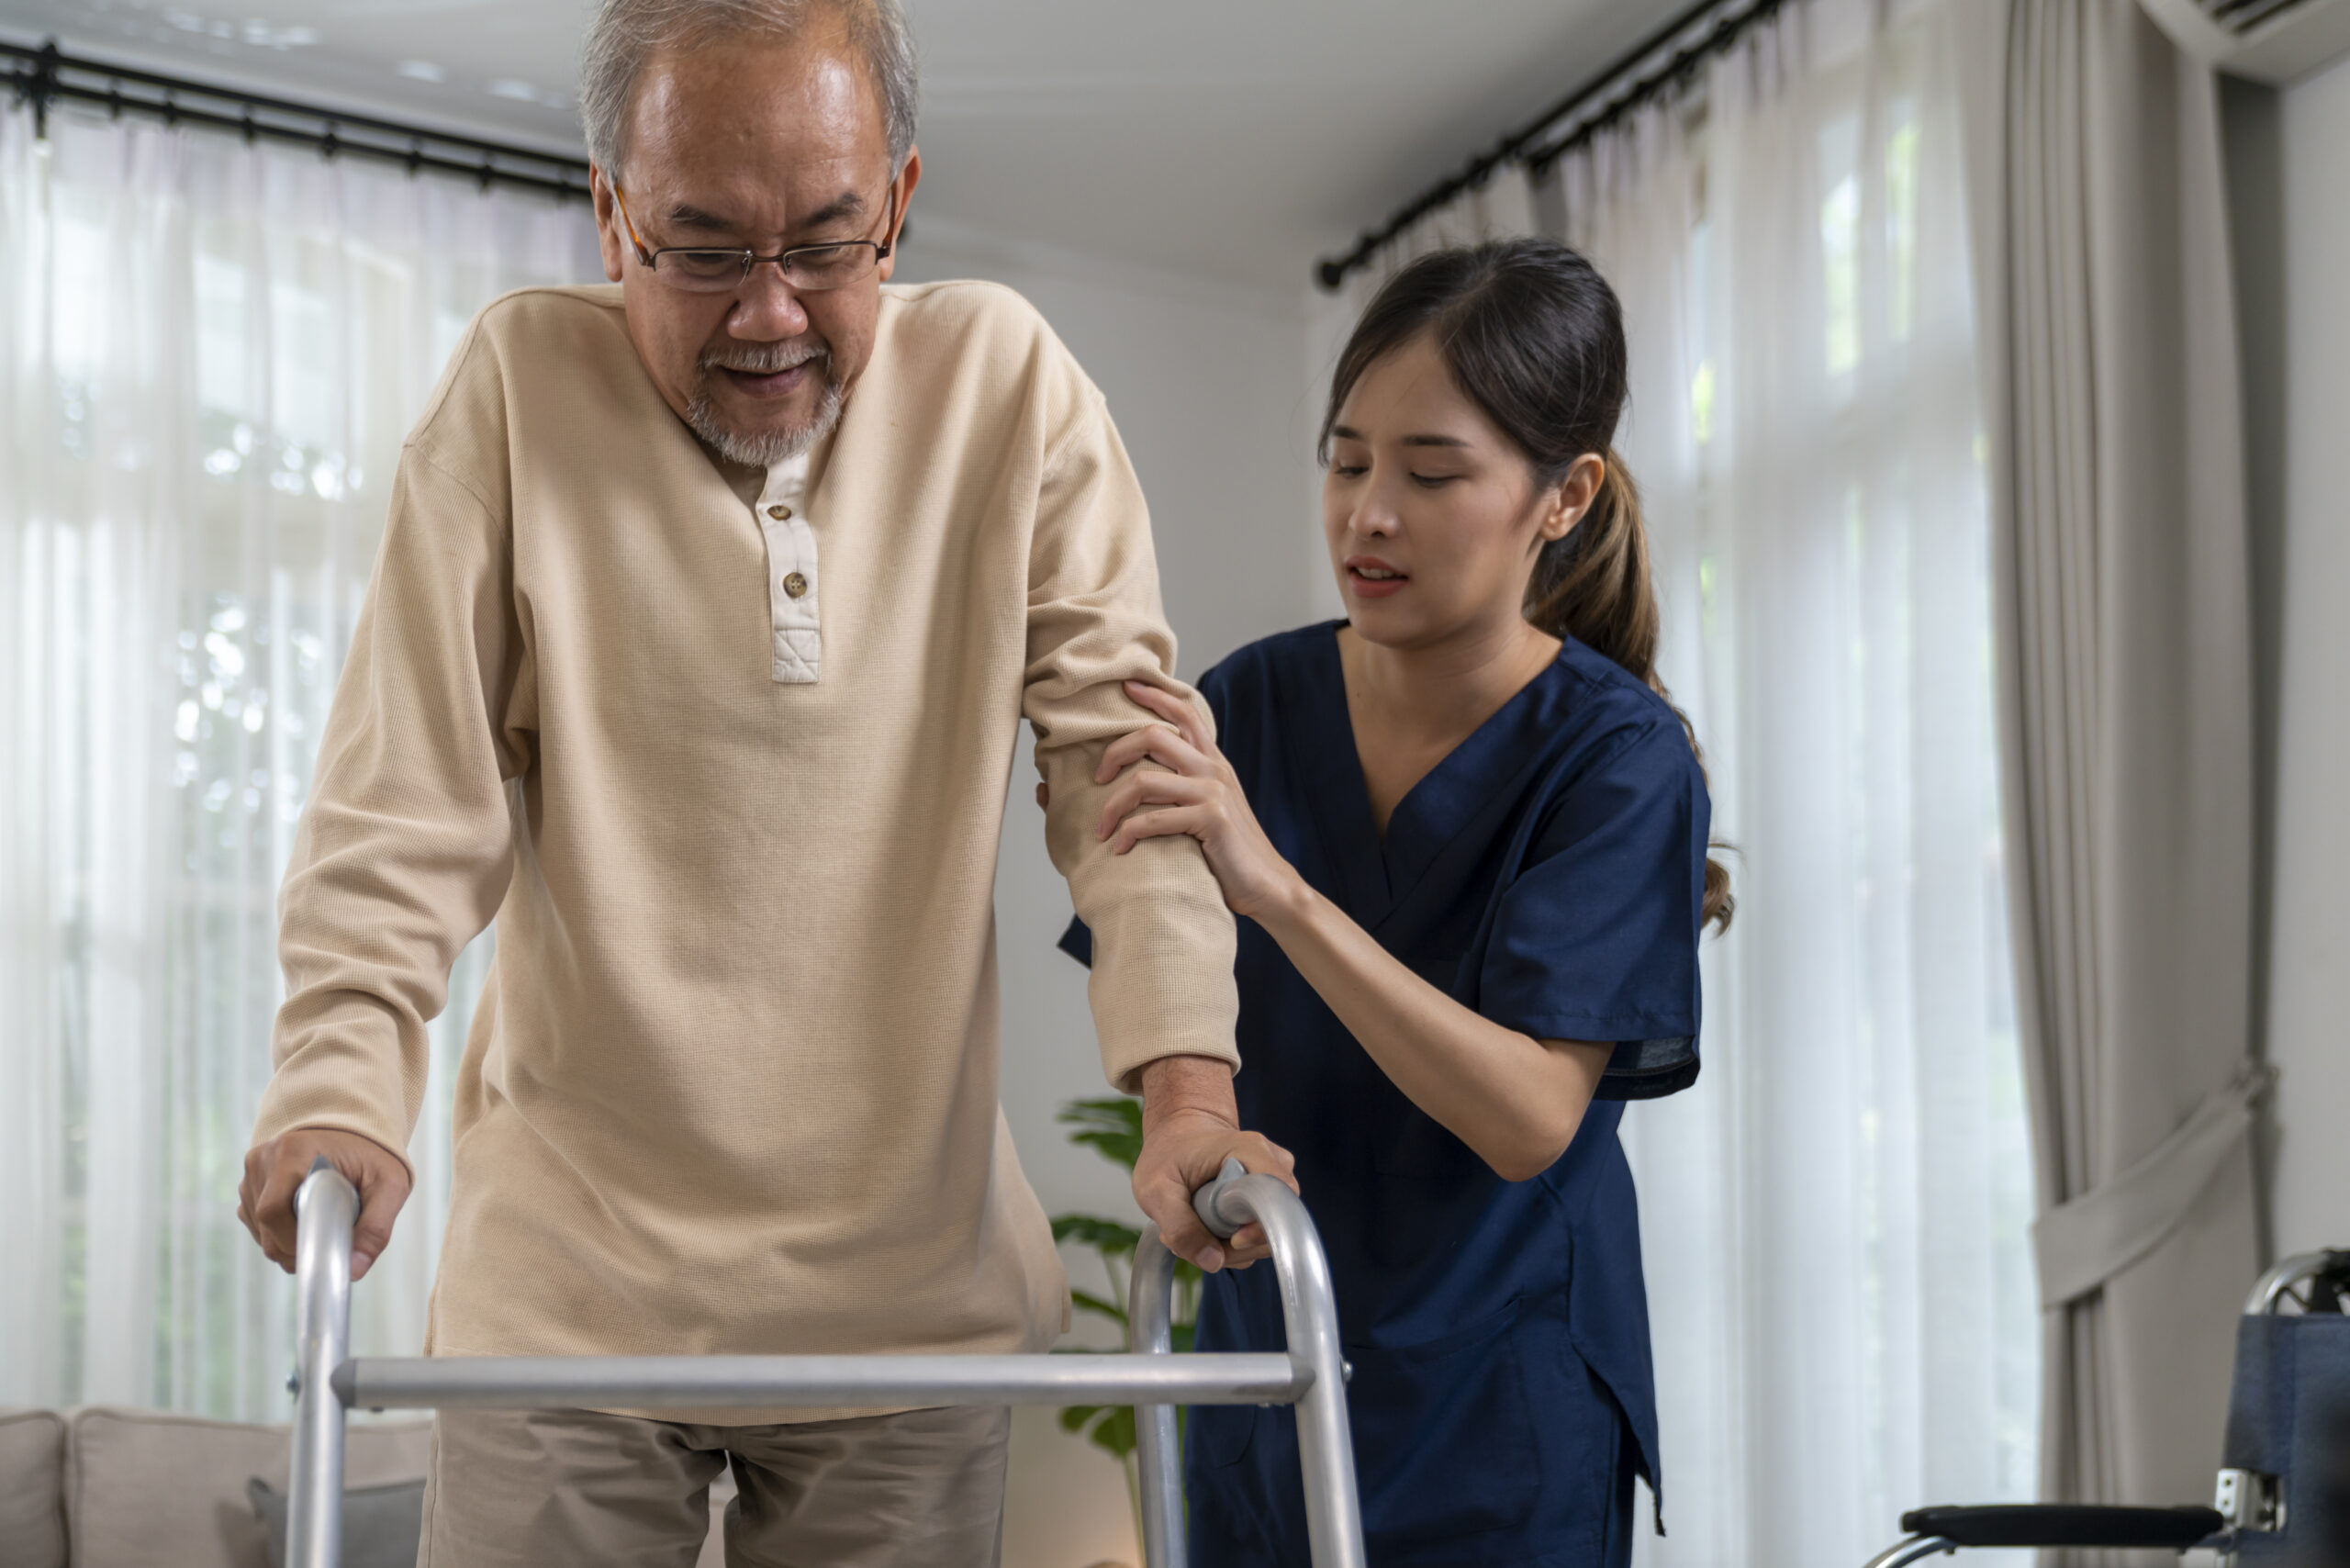 An elderly person using a walker with the assistance of a caregiver. Alt text: "Elderly individual improving mobility with the aid of a walker and caregiver support.